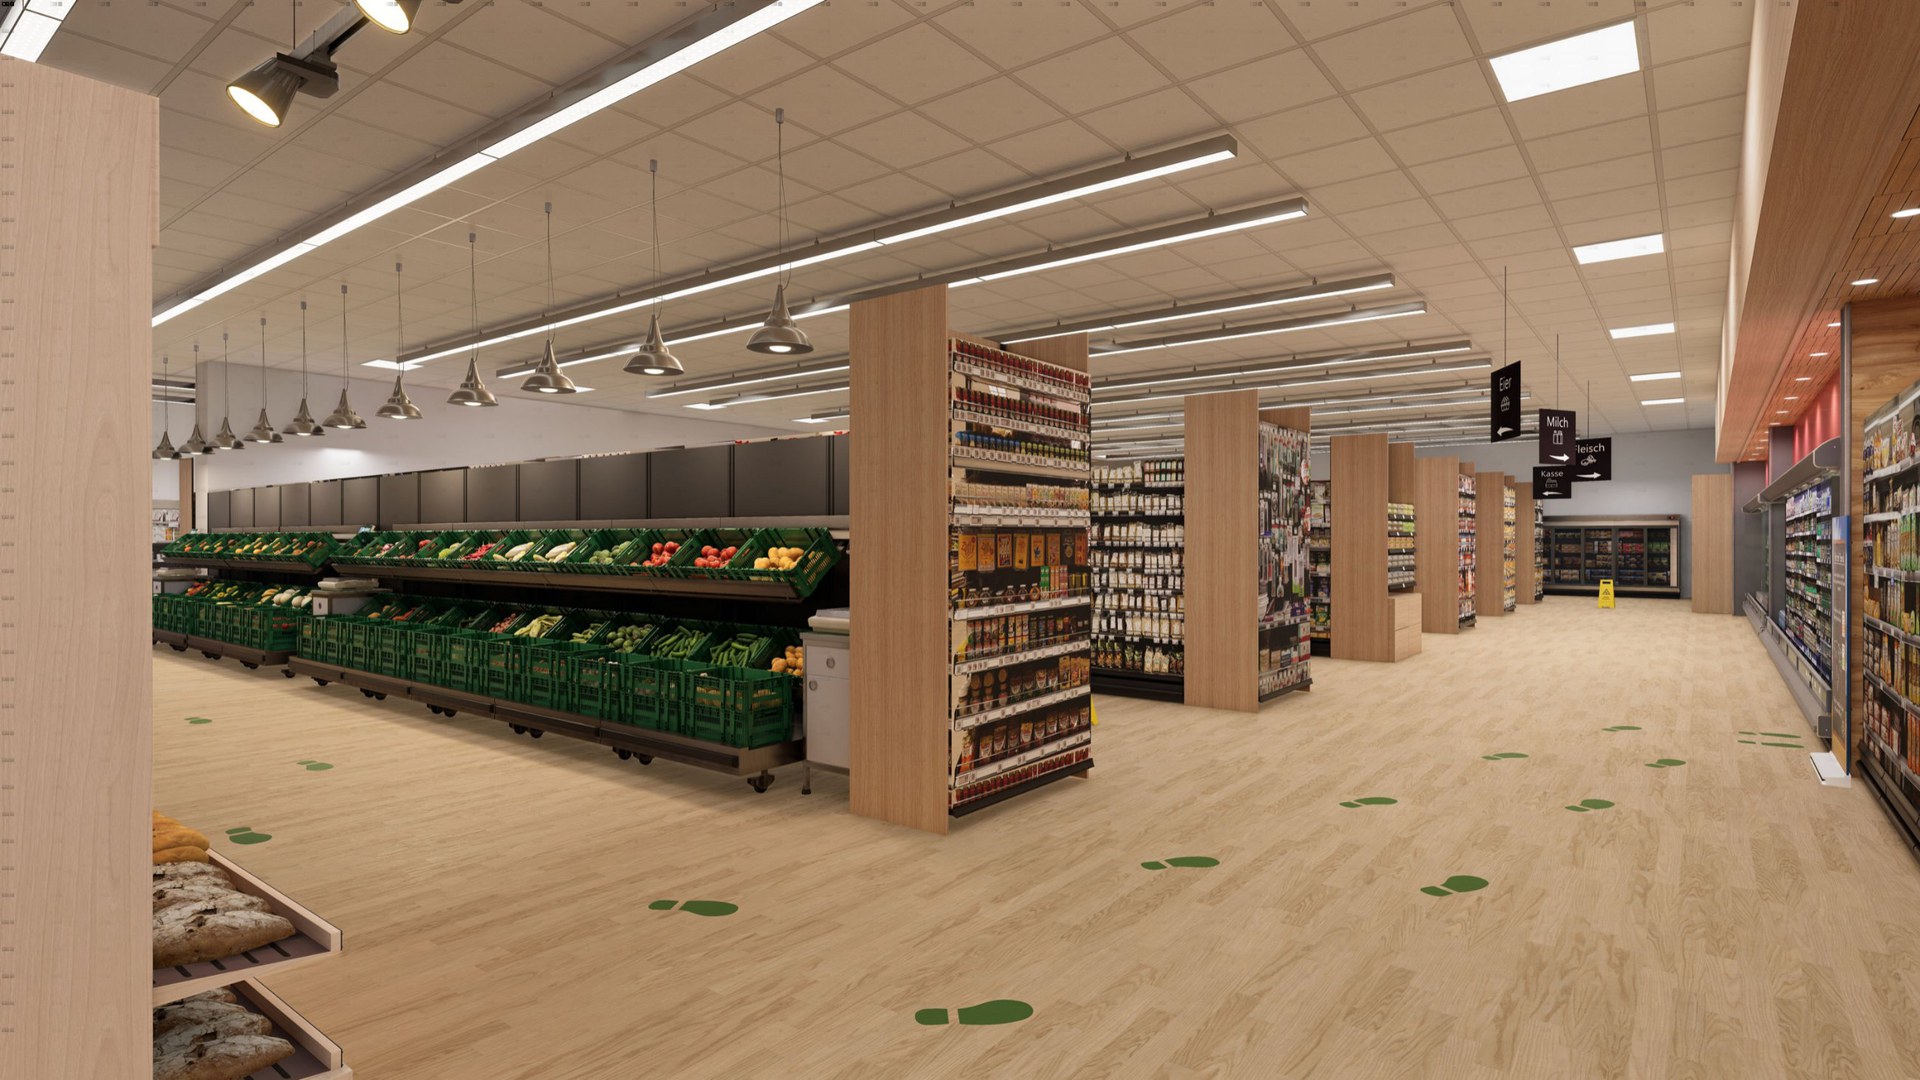 The virtual supermarket - was based on a real supermarket.